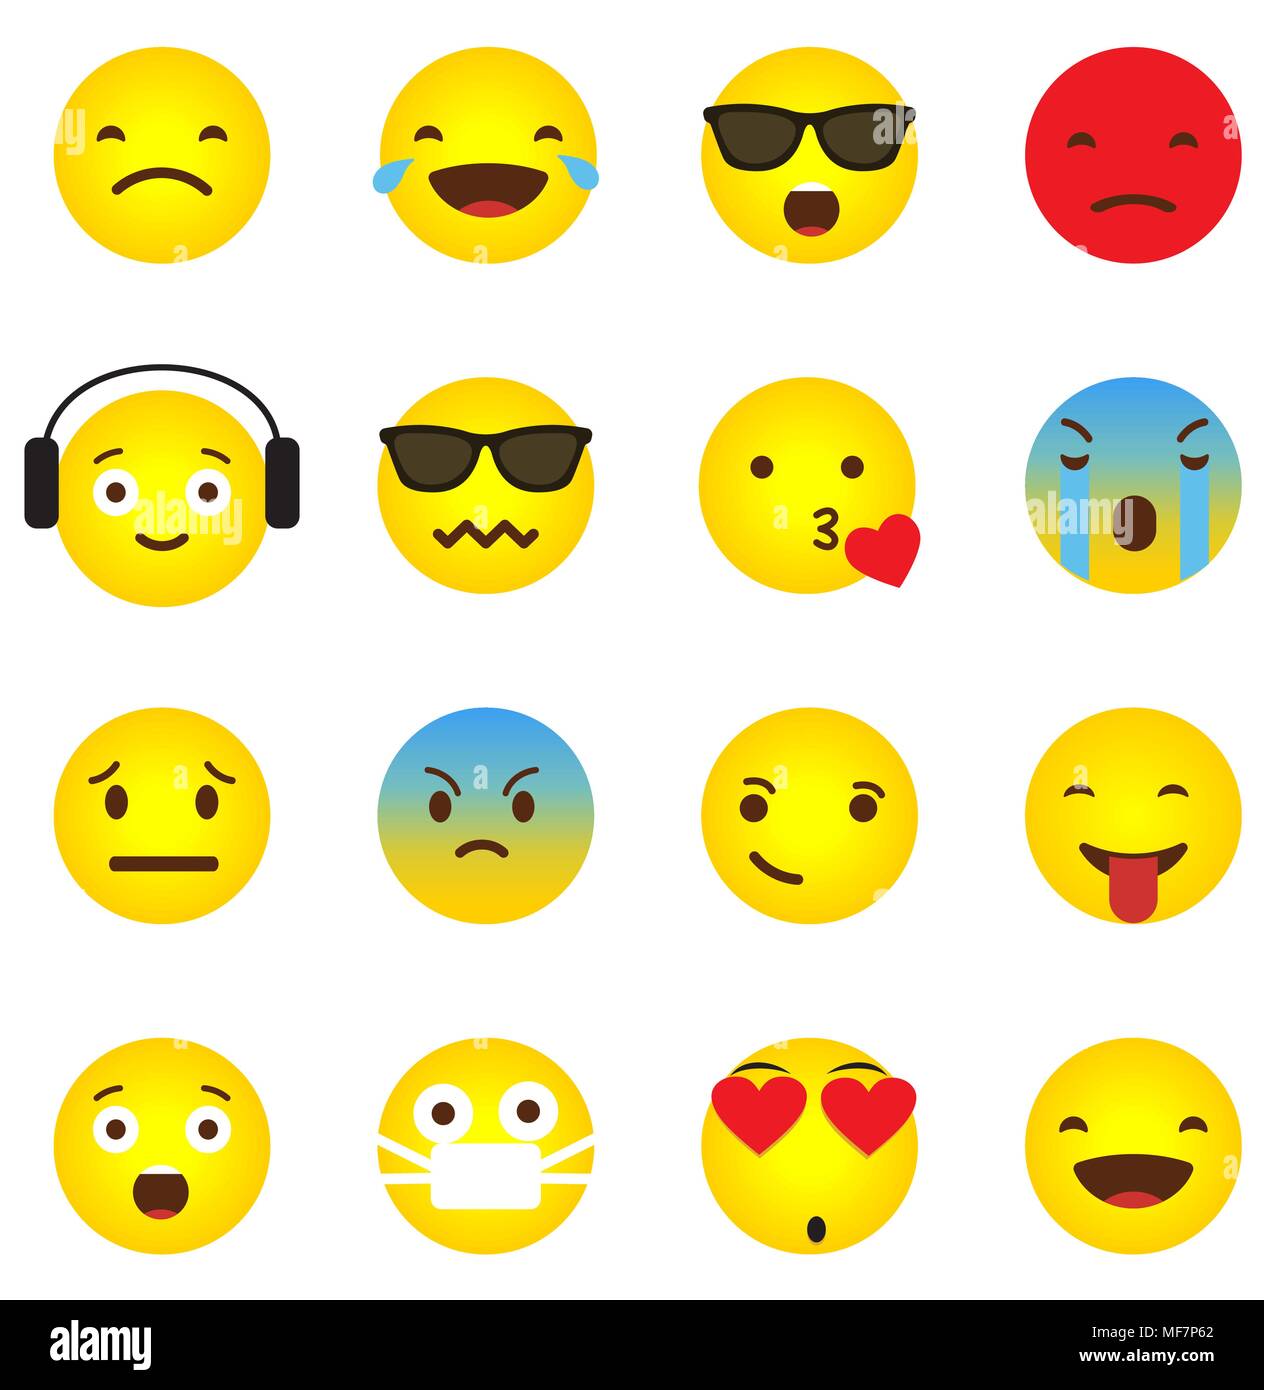 Emoji icon collection with different emotional faces Stock Vector Image ...